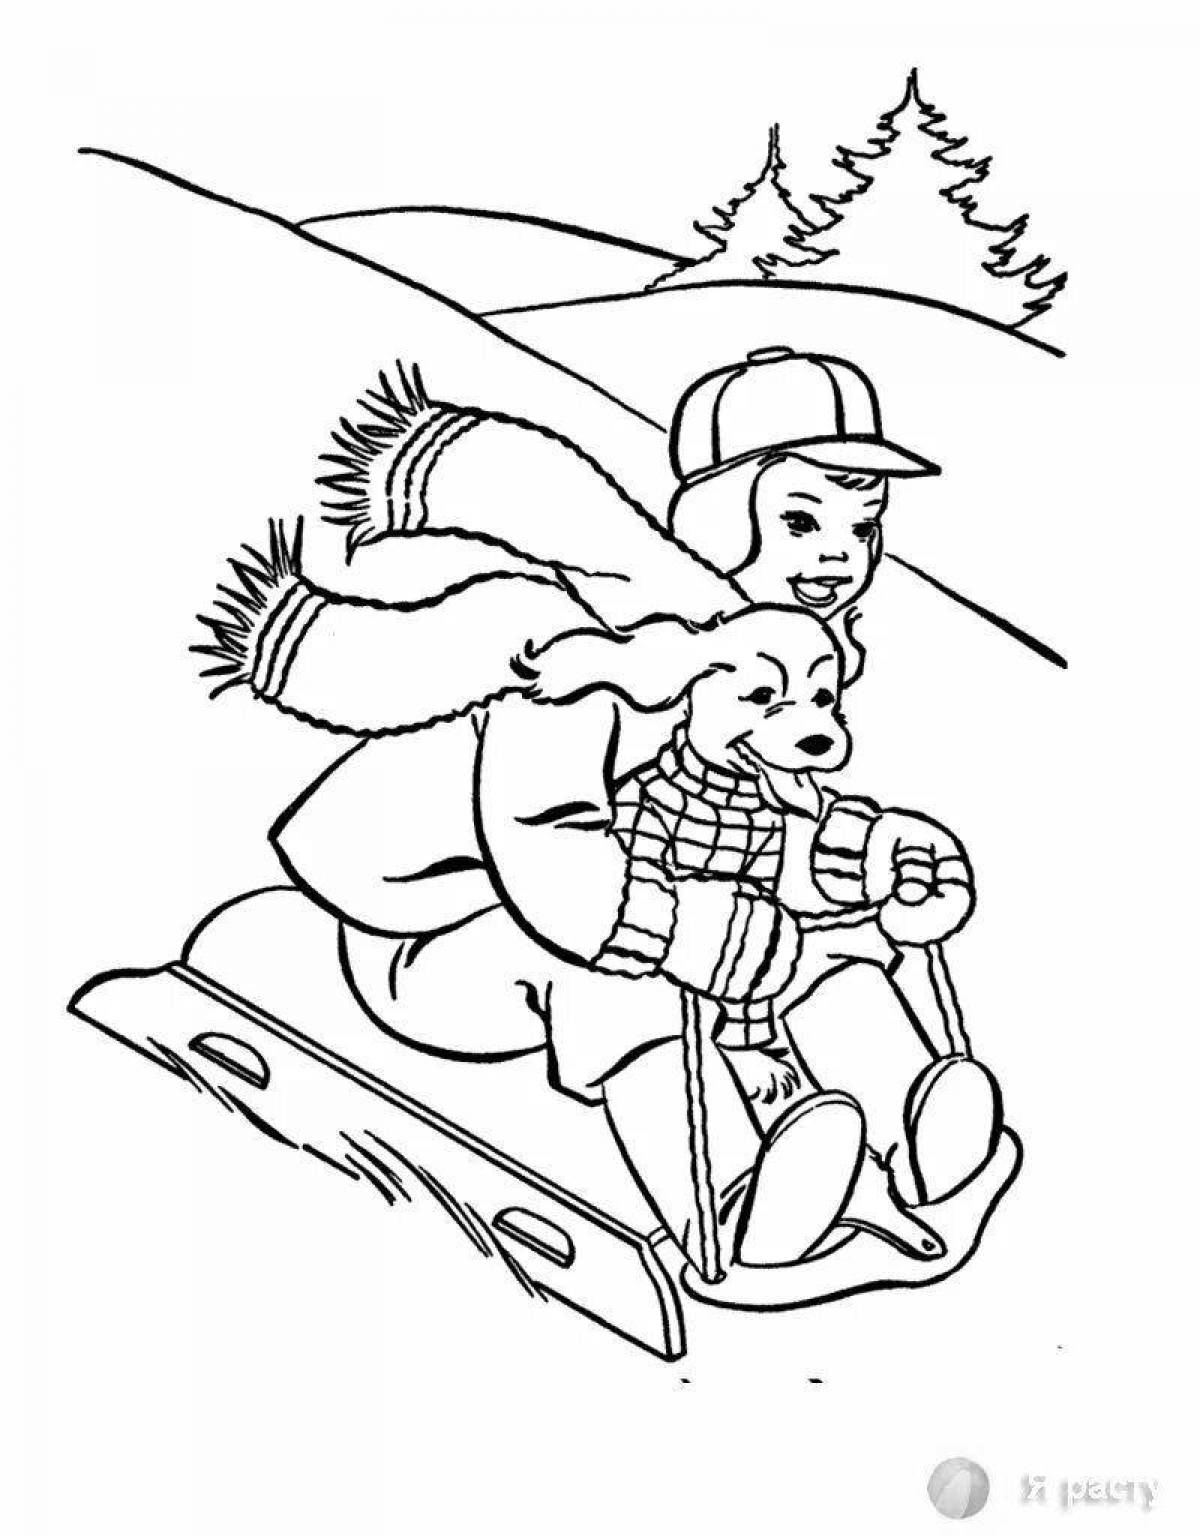 Fun coloring book for kids on a sled